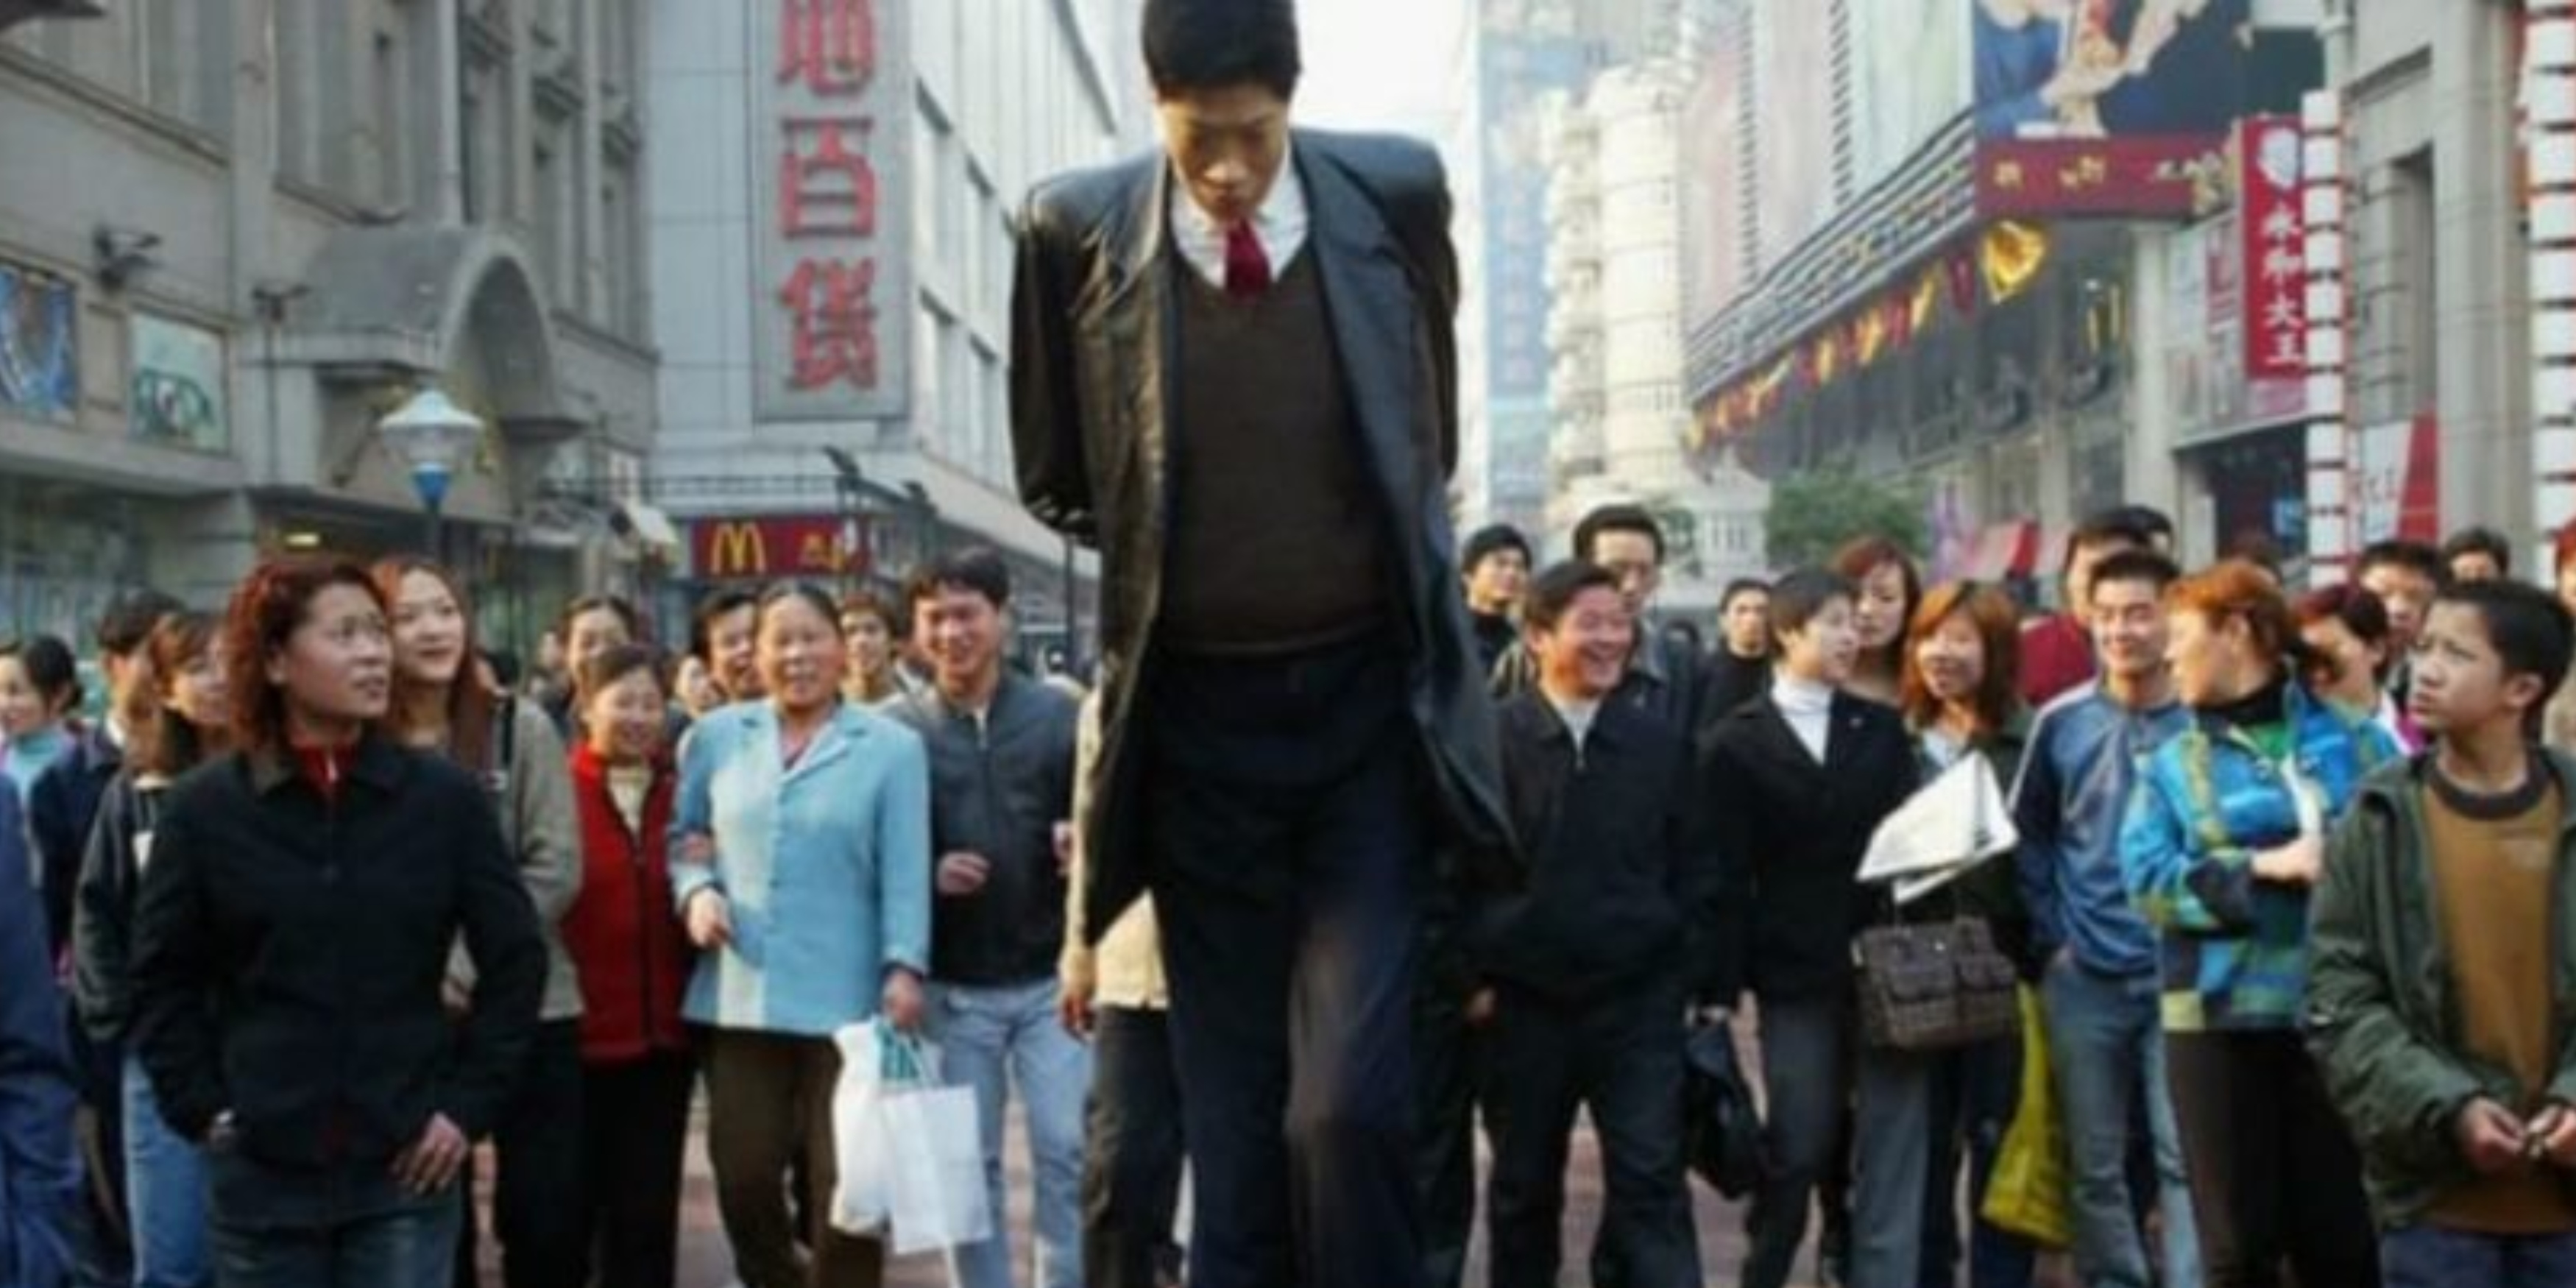 Beijingers Are Second Tallest in Nation